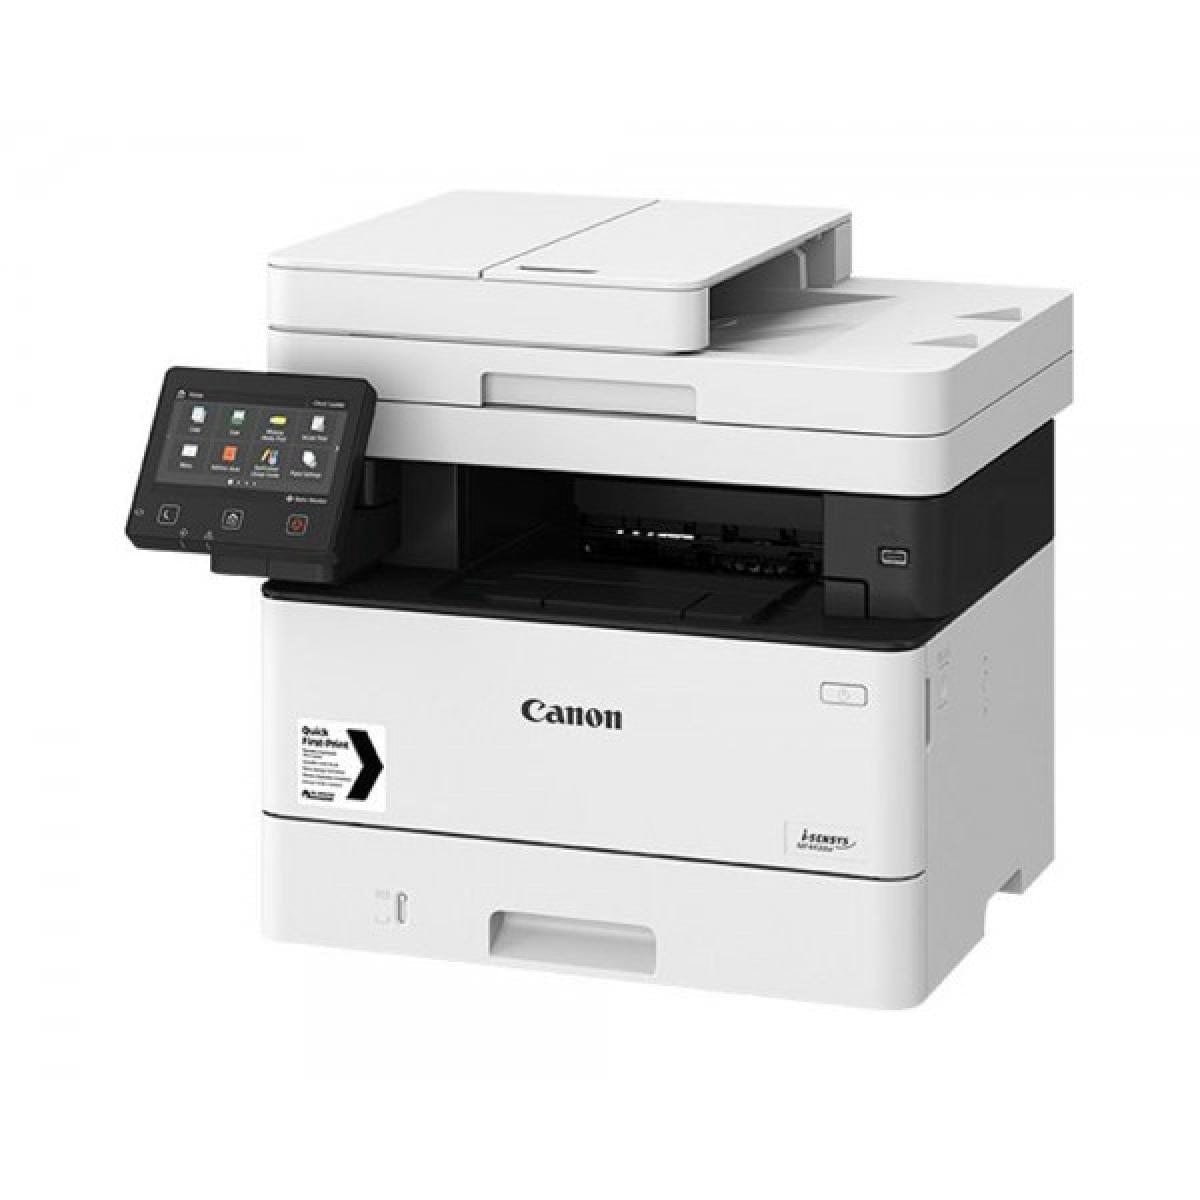 CANON Printers Canon ISENSYS MF-443Dw All-in-One Laser Printer